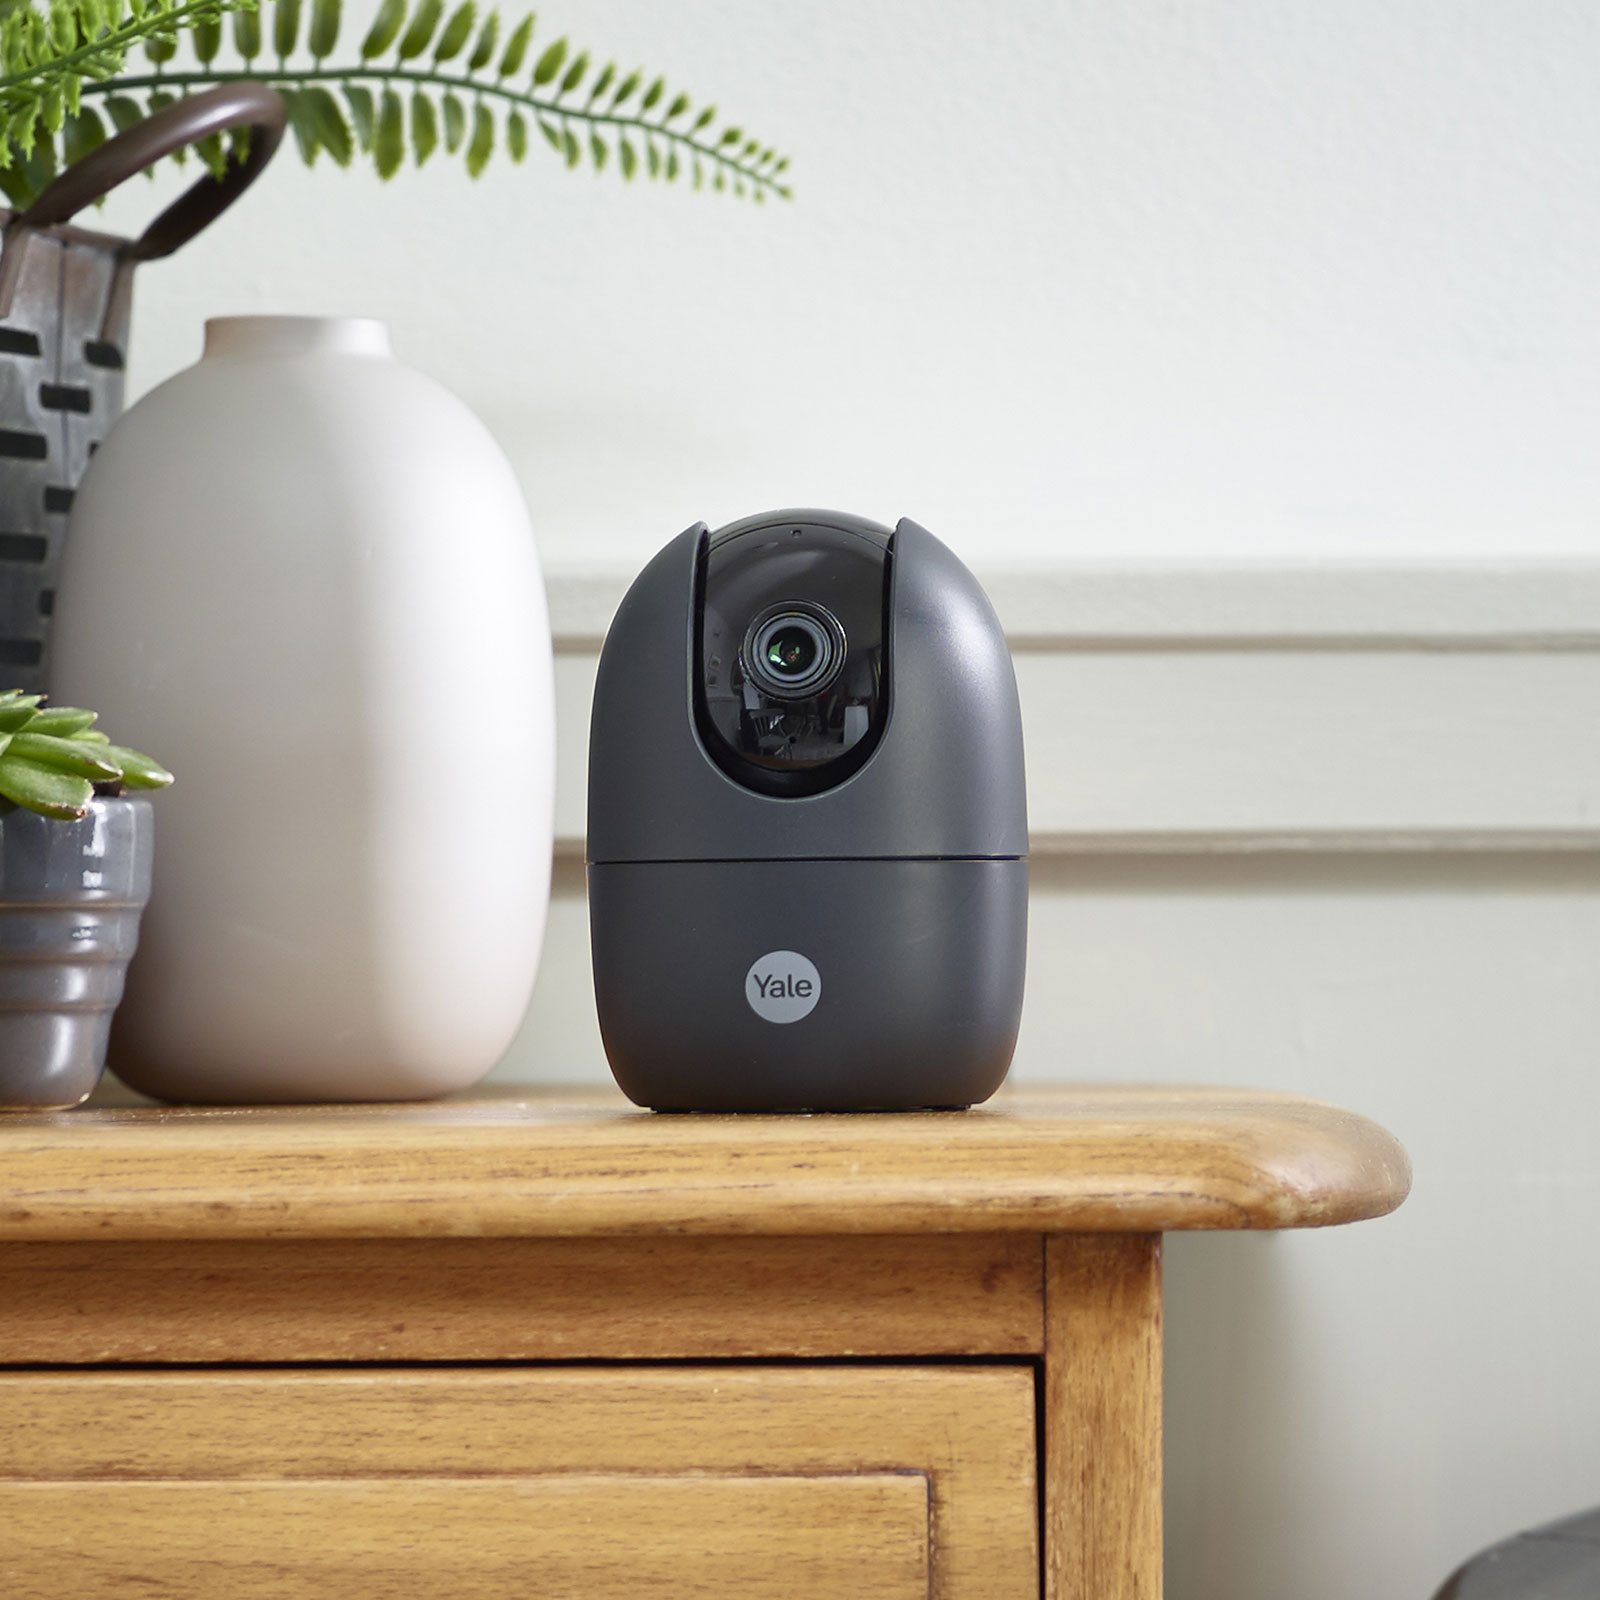 Yale W-Fi indoor camera, pivot and tilt function